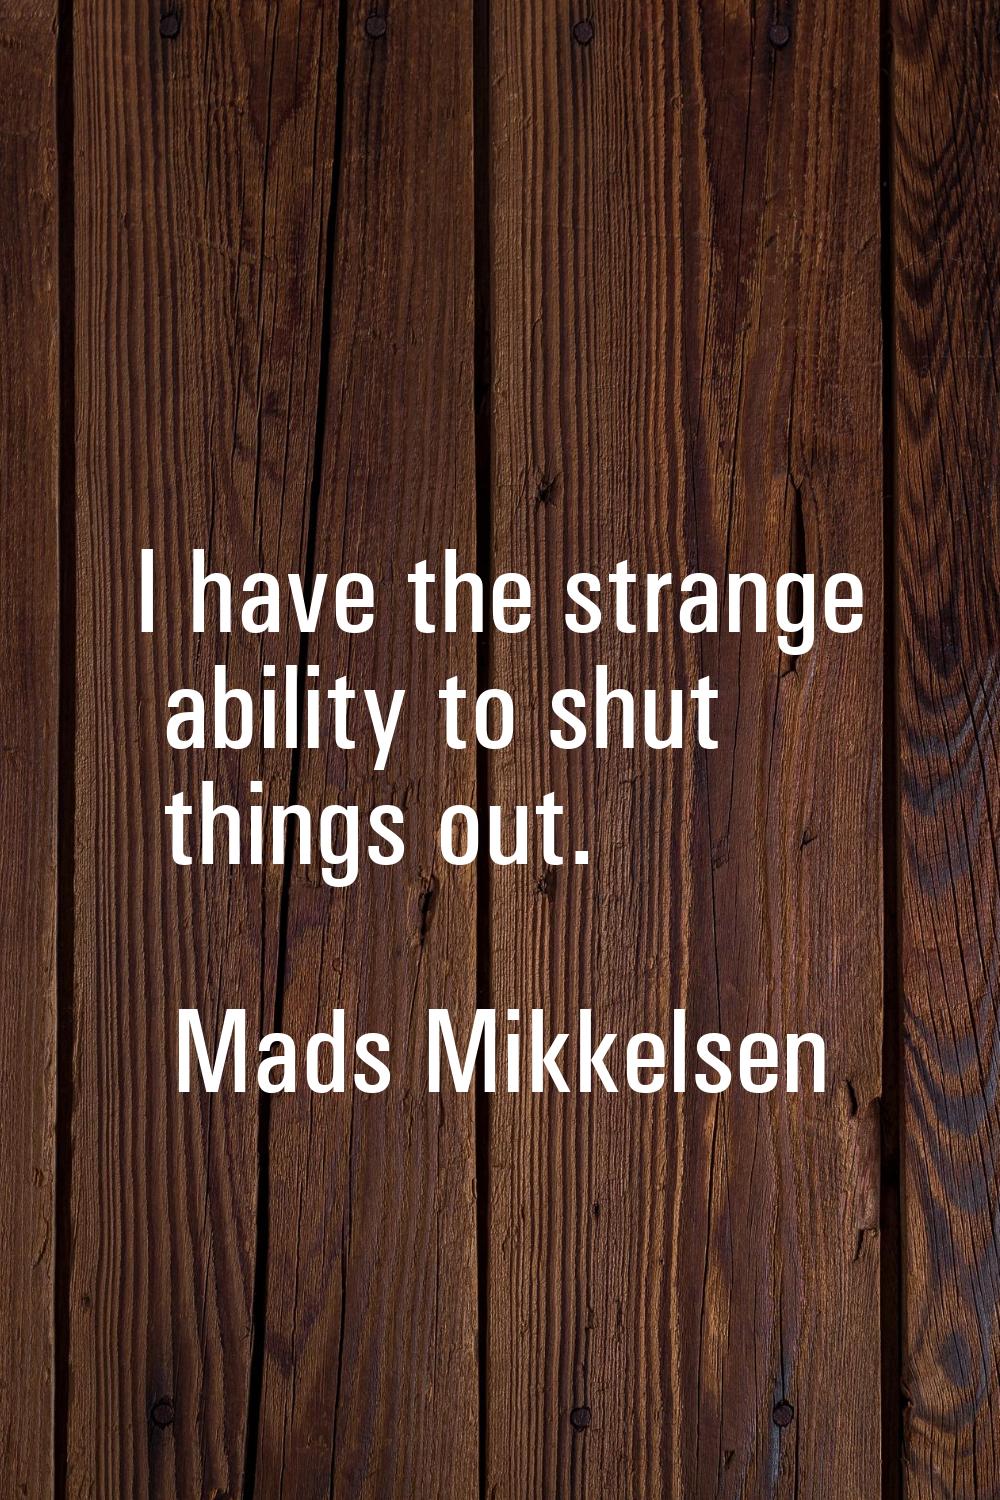 I have the strange ability to shut things out.